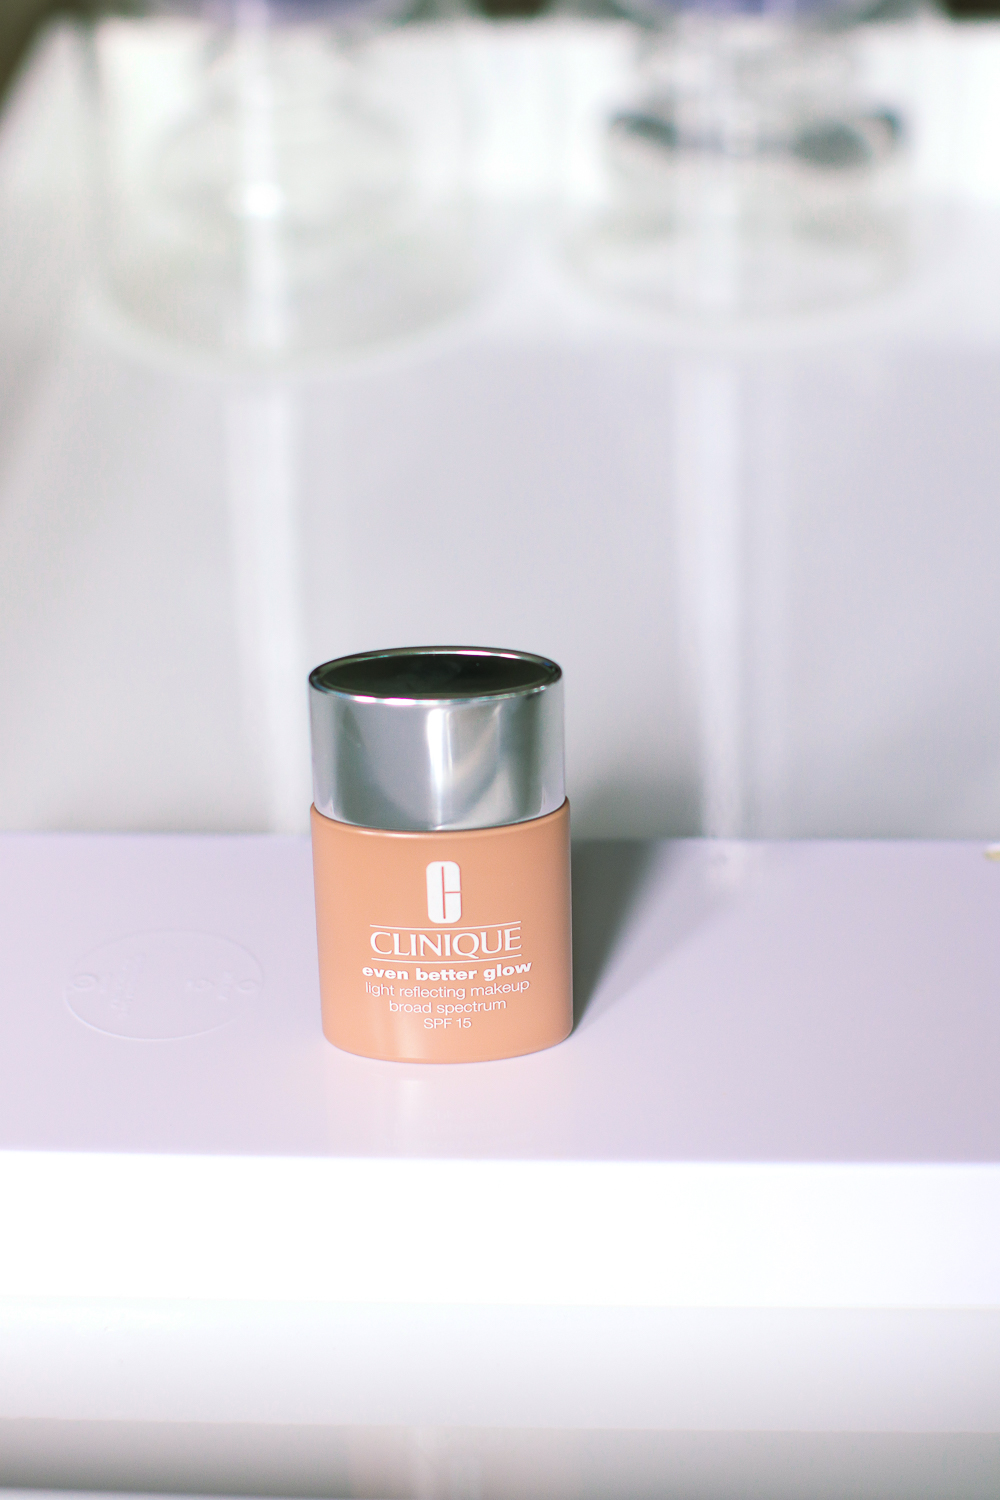 Foundation Over 40, Clinique even better glow foundation with SPF review